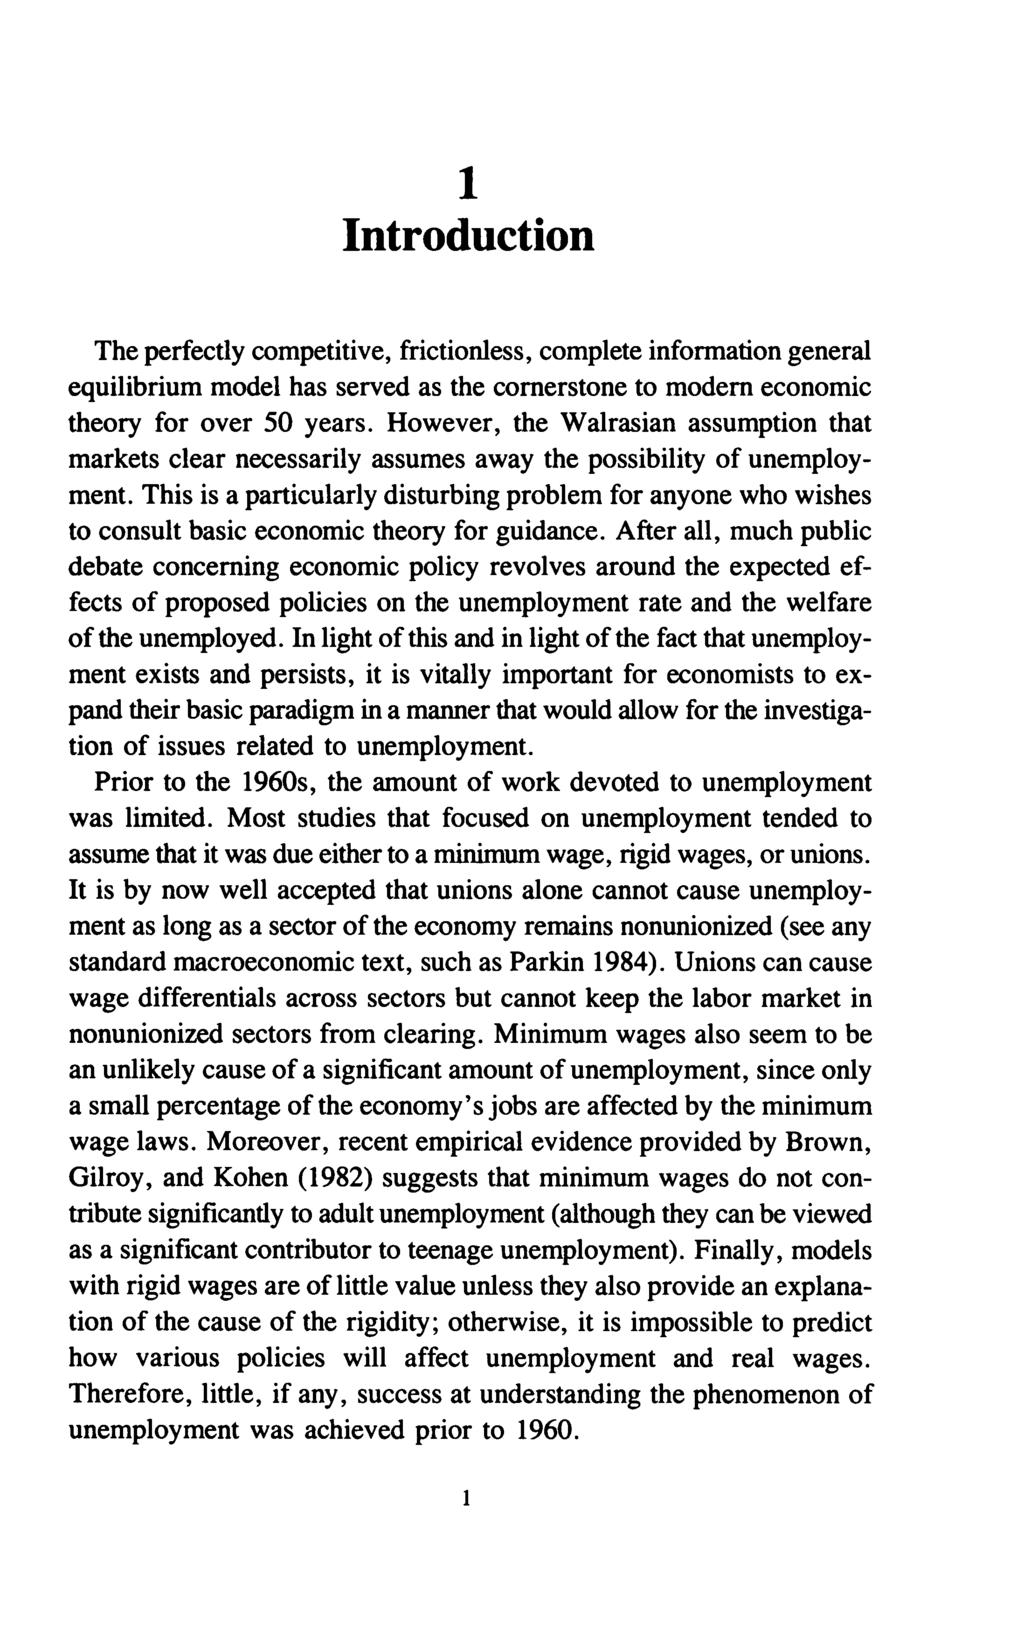 1 Introduction The perfectly competitive, frictionless, complete information general equilibrium model has served as the cornerstone to modern economic theory for over 50 years.